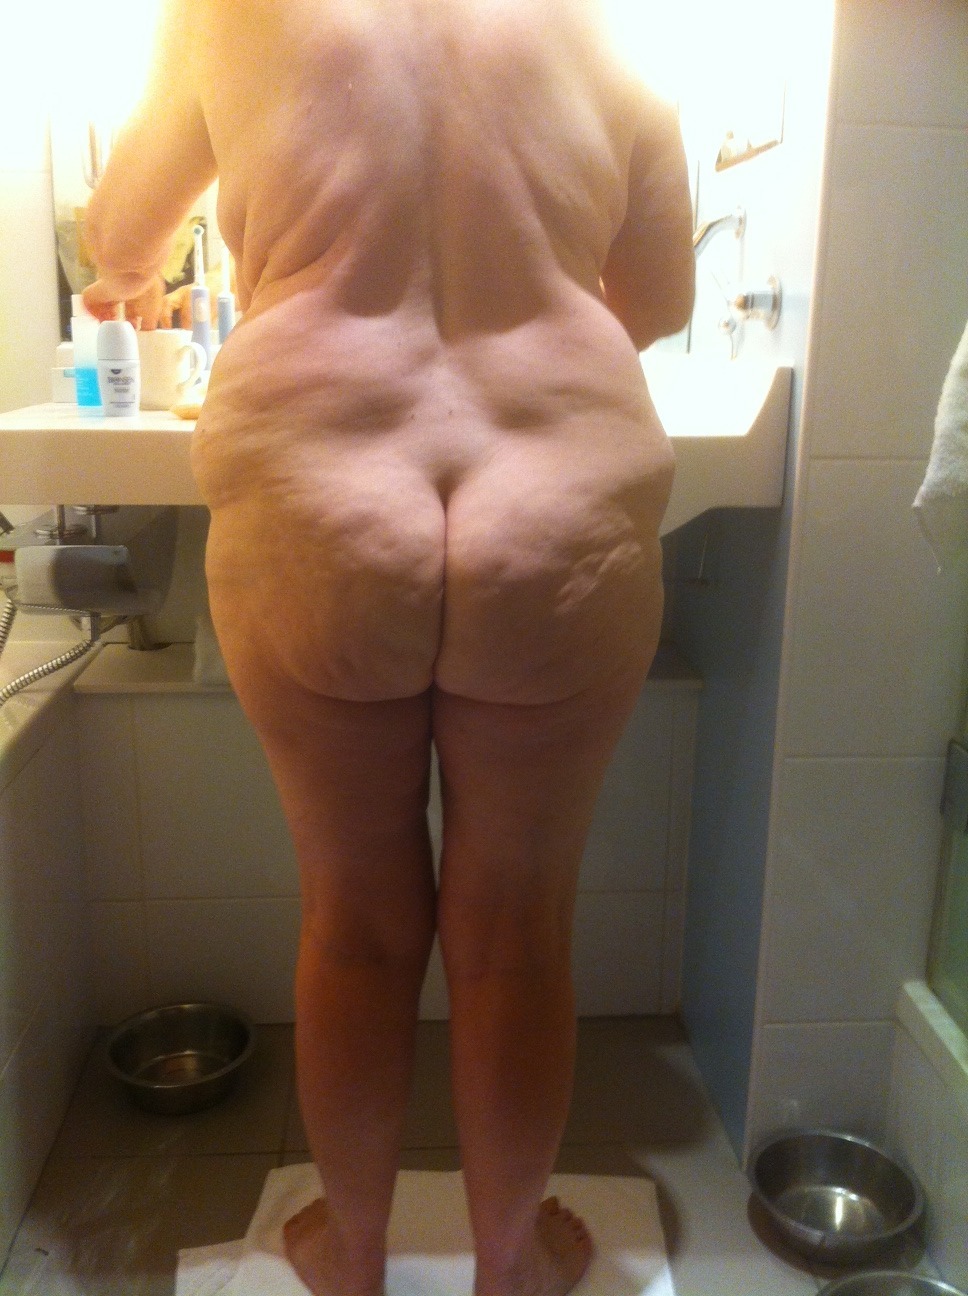 Wow, what a gorgeous flabby wide old ass on this senior woman. Iâ€™d love to